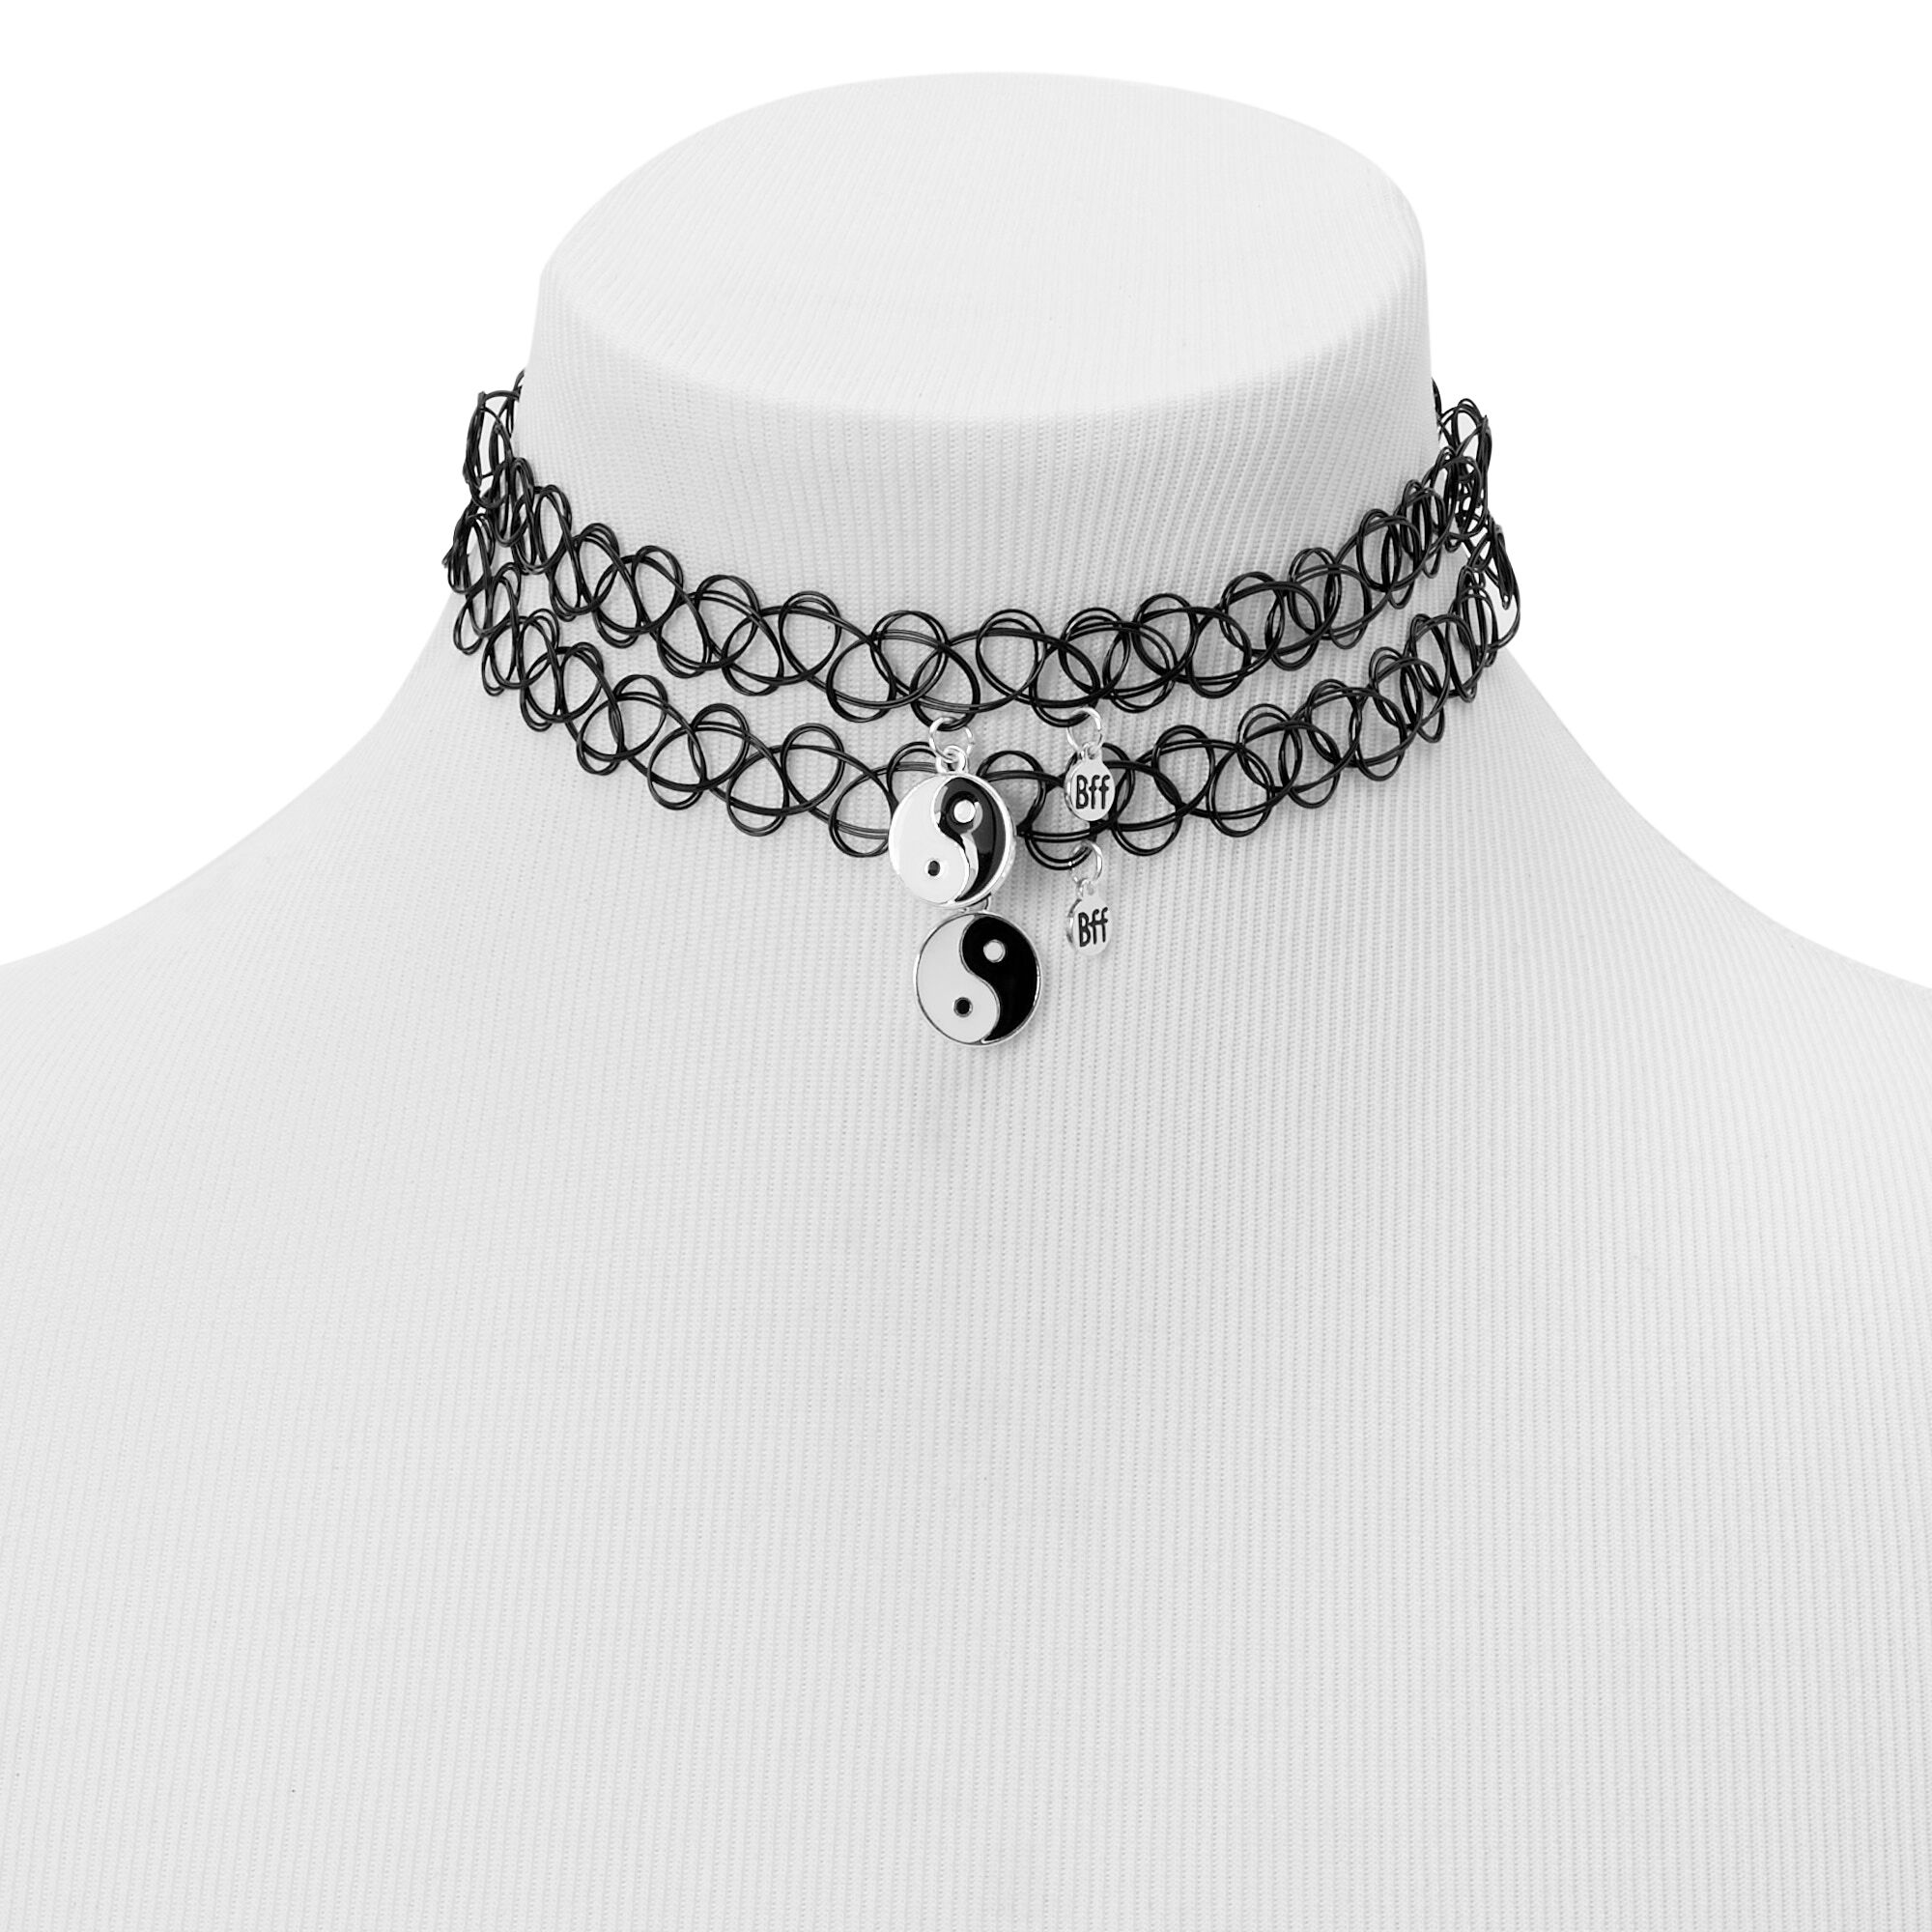 Stretch Tattoo Choker Necklace - Multiple Colors – Thirsty Buyer